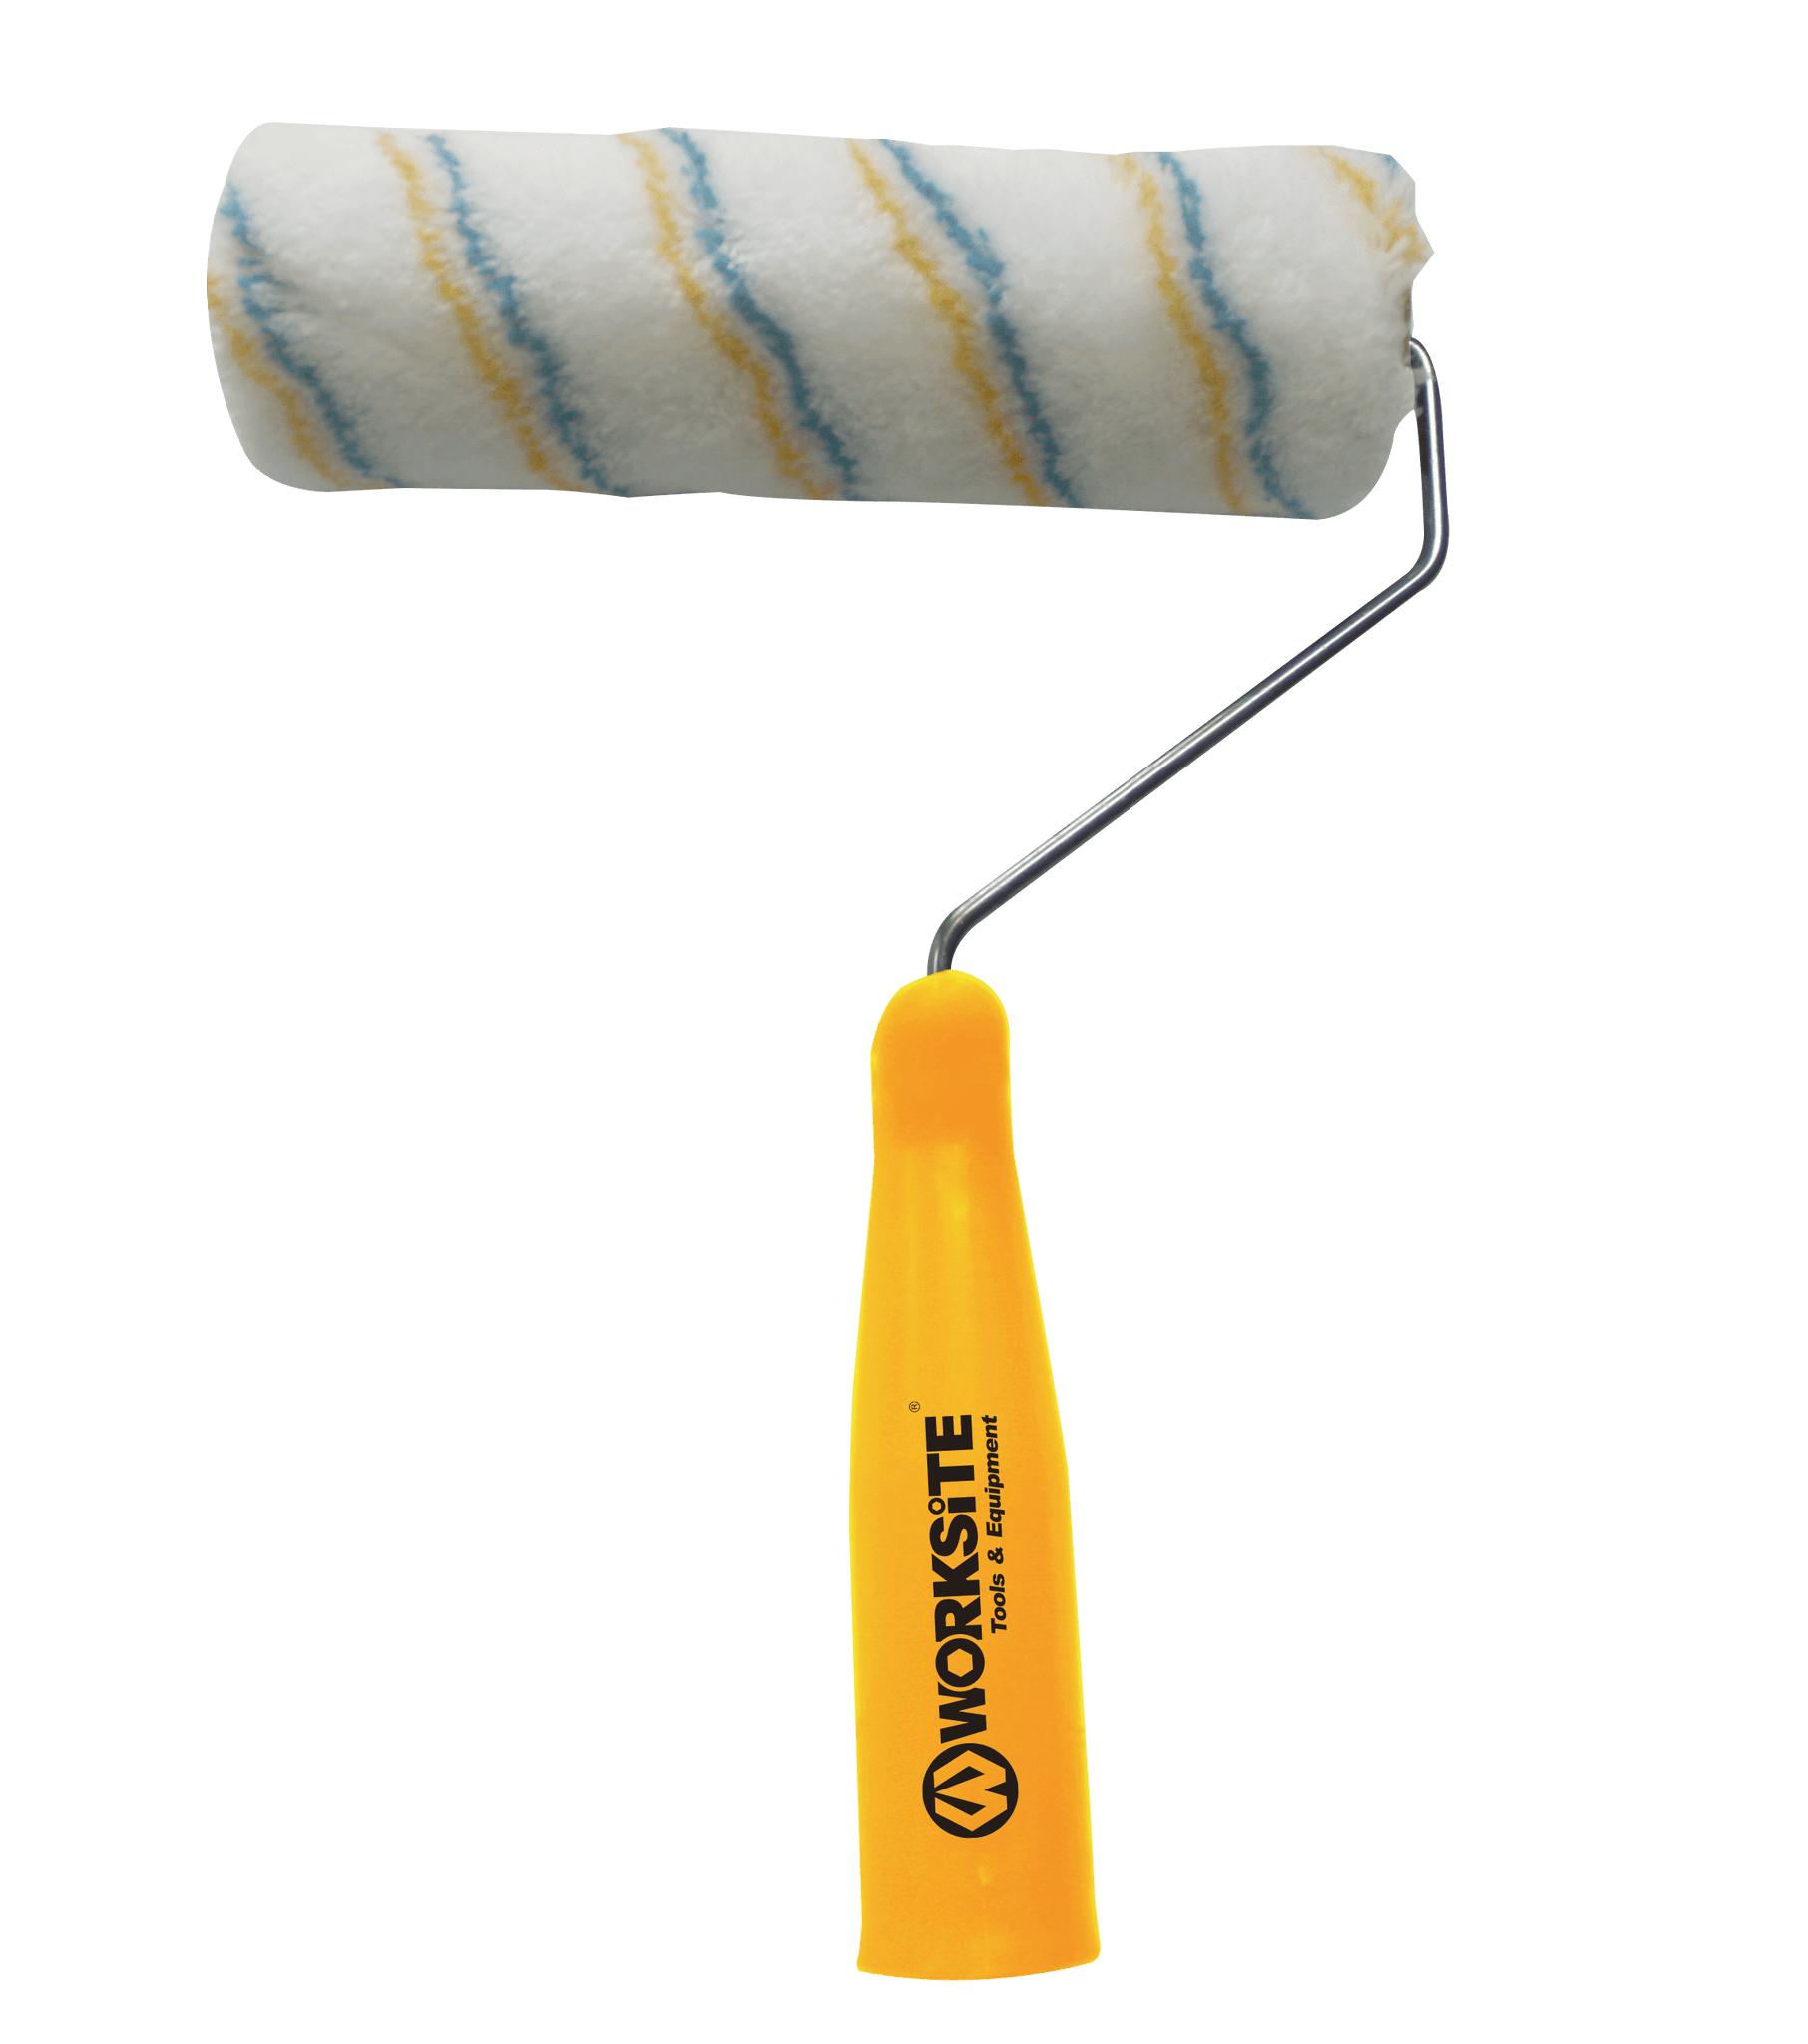 Worksite Paint Roller Cylinder Brush 1/2 X 9 inch, 16 inch long Ergonomic Comfort Grip Handle for maximum comfort and reduced fatigue. Designed for use with all paints and stains, Get an ultra smooth finish- WT8100